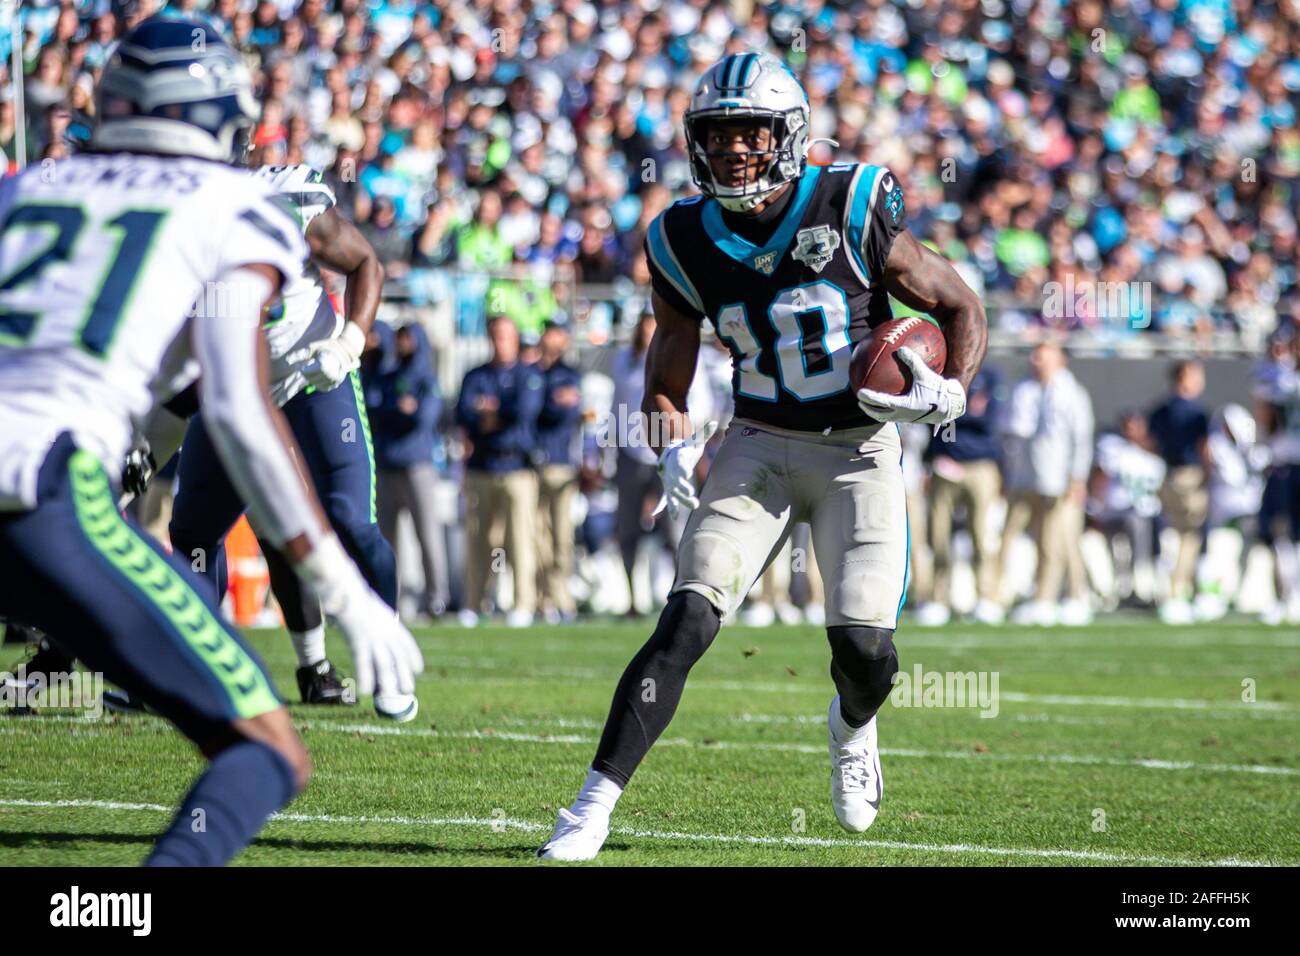 Charlotte, North Carolina, USA. 15th Dec, 2019. Carolina Panthers wide receiver Curtis Samuel (10) during game action at Bank of America Stadium. The Seahawks won 30-24. Credit: Jason Walle/ZUMA Wire/Alamy Live News Stock Photo